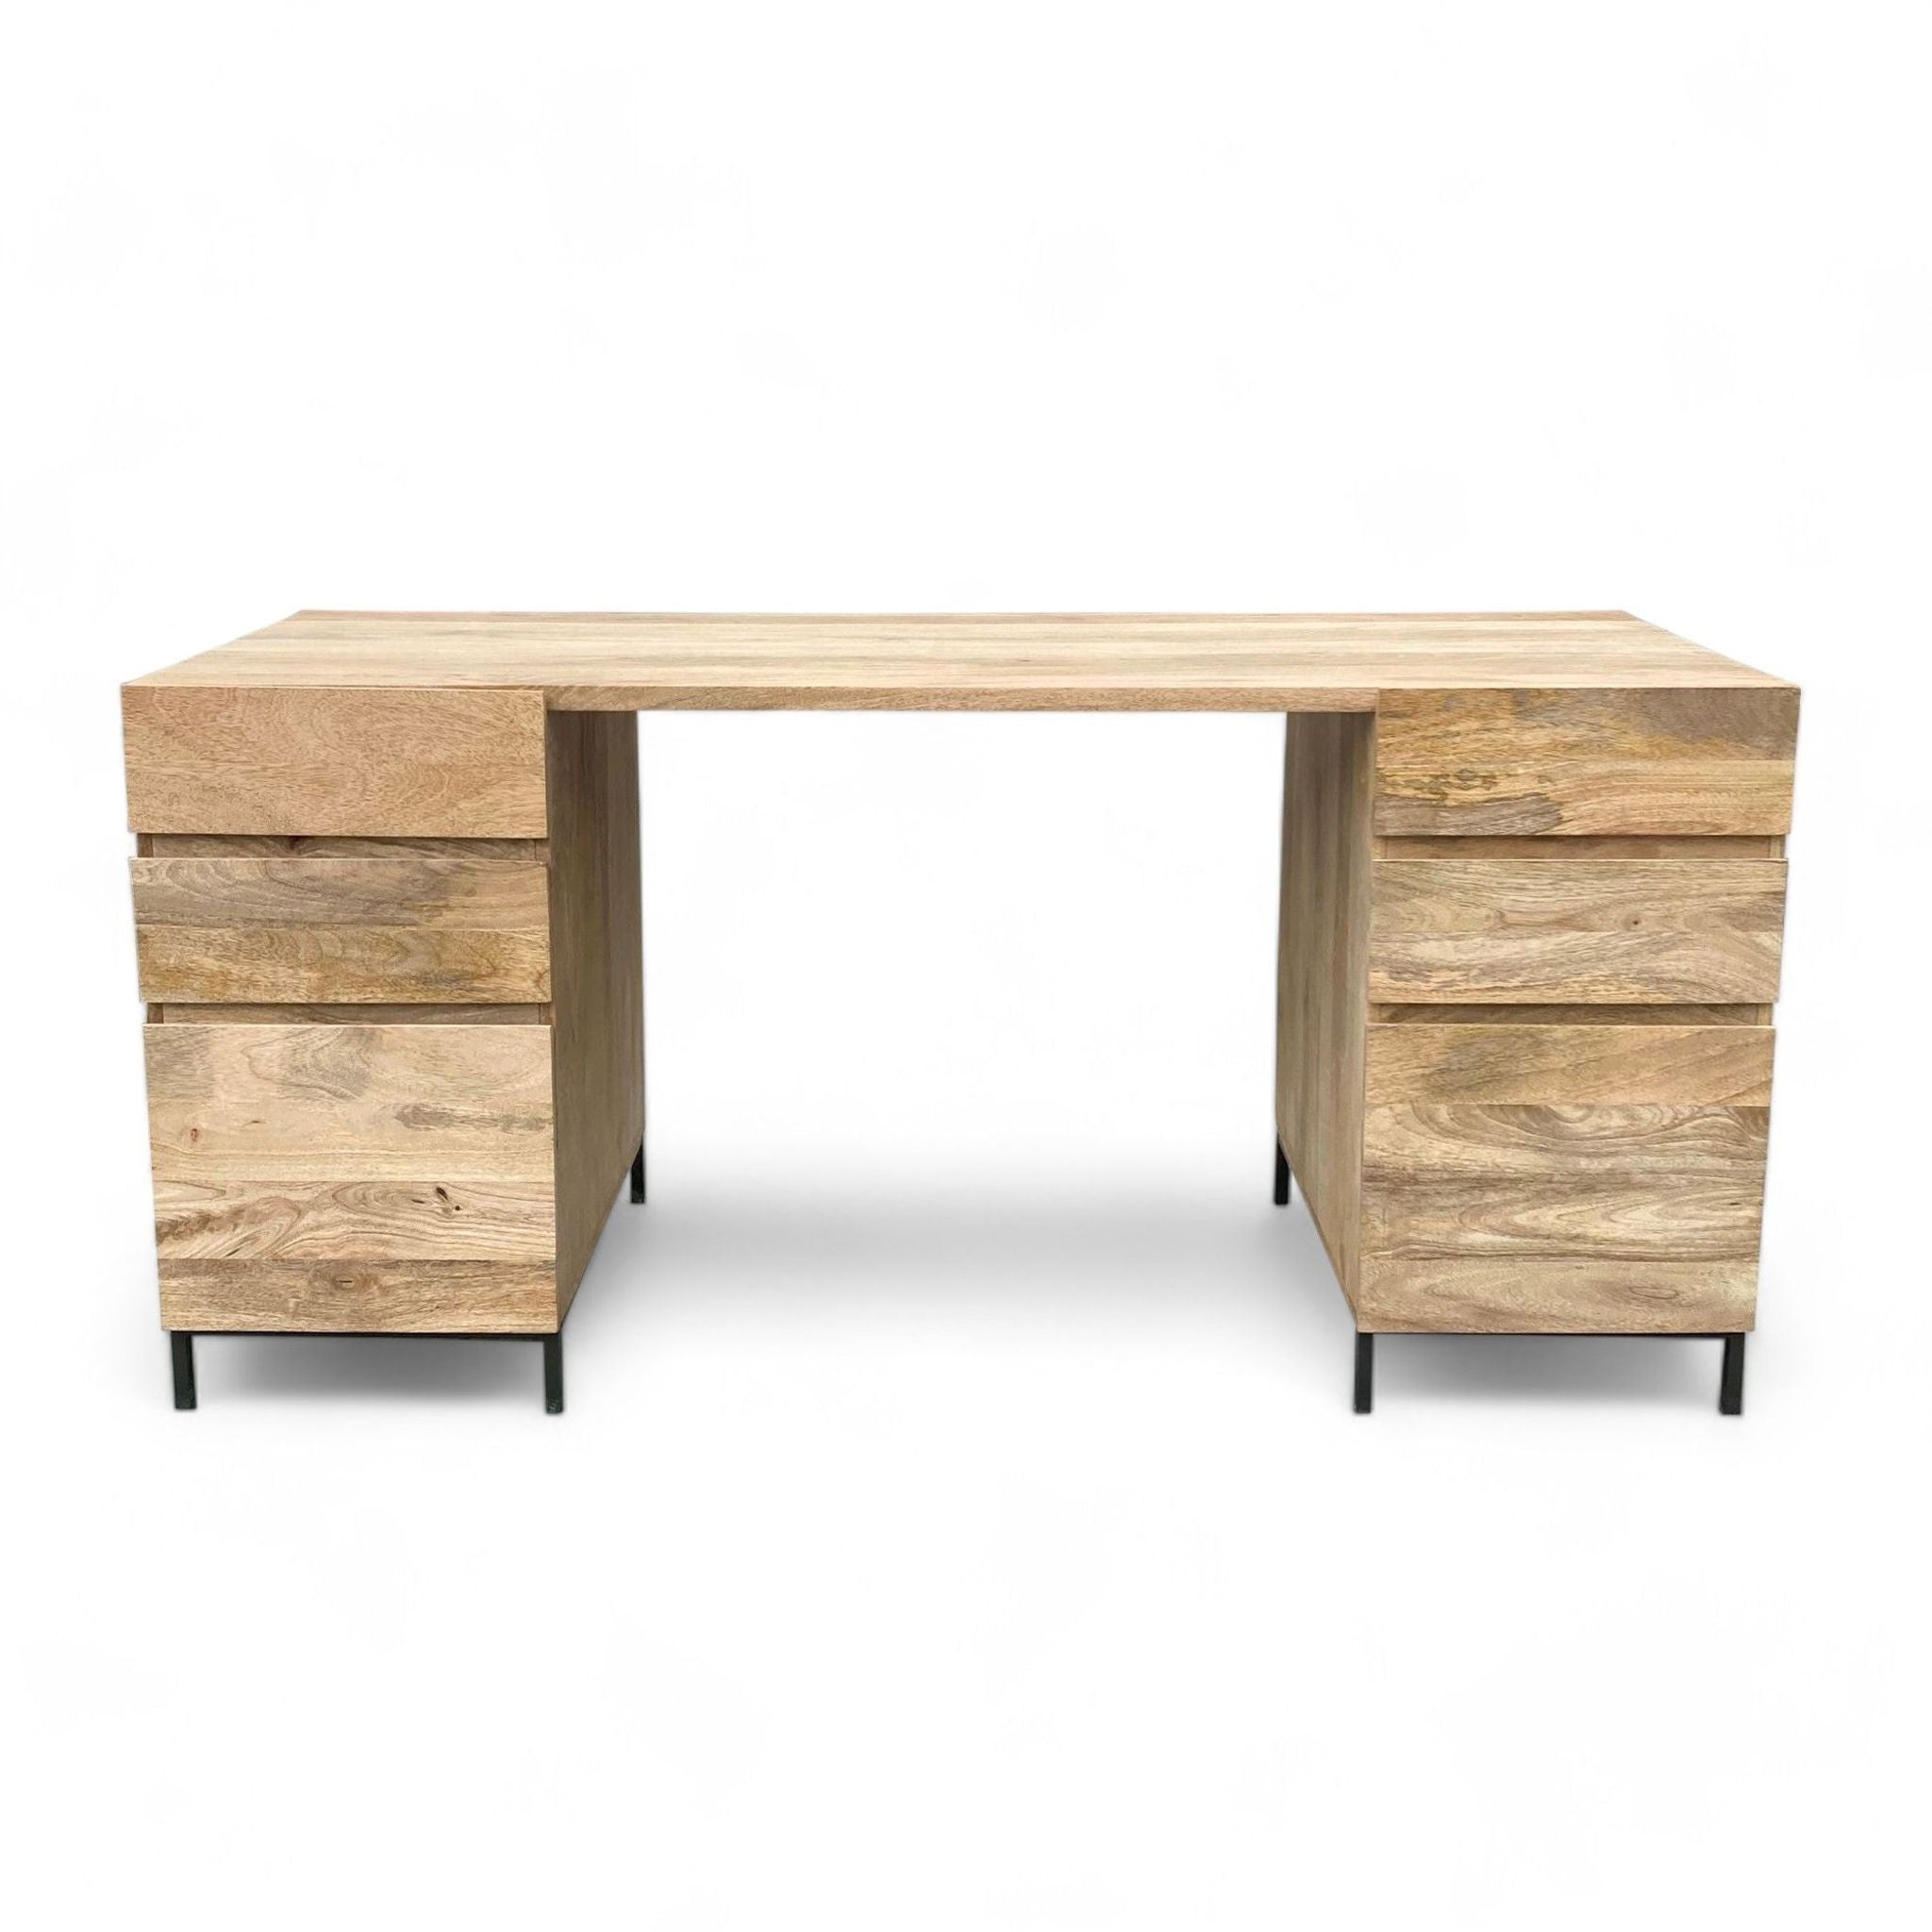 Alt text 1: West Elm modern desk with solid mango wood and blackened steel frame, featuring two side drawers and a filing cabinet.